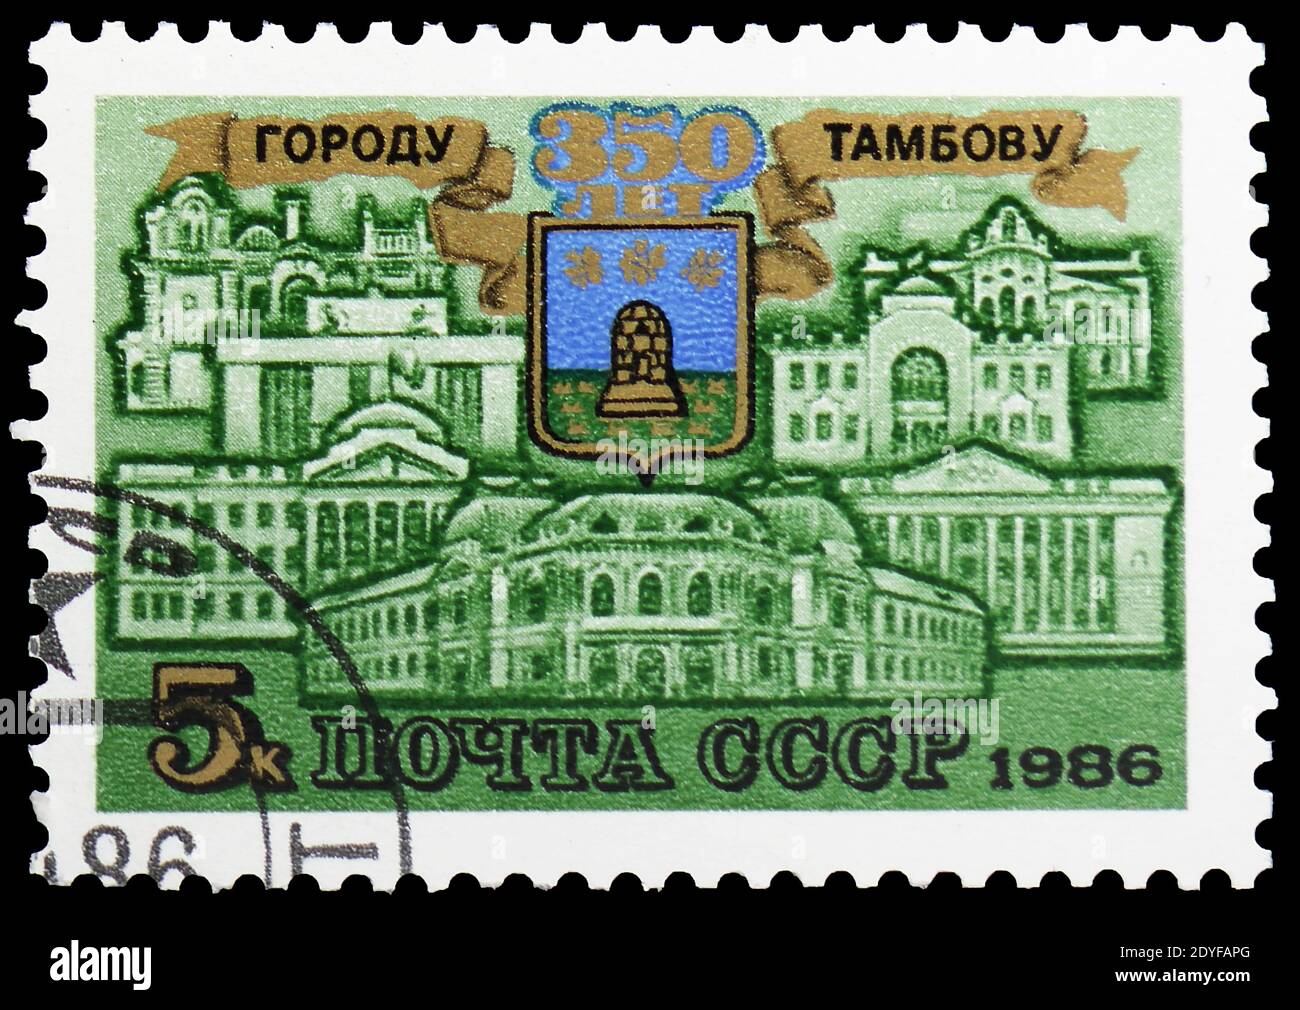 MOSCOW, RUSSIA - MAY 25, 2019: Postage stamp printed in Soviet Union (Russia) devoted to 350th years of Tambov, Anniversaries serie, circa 1986 Stock Photo